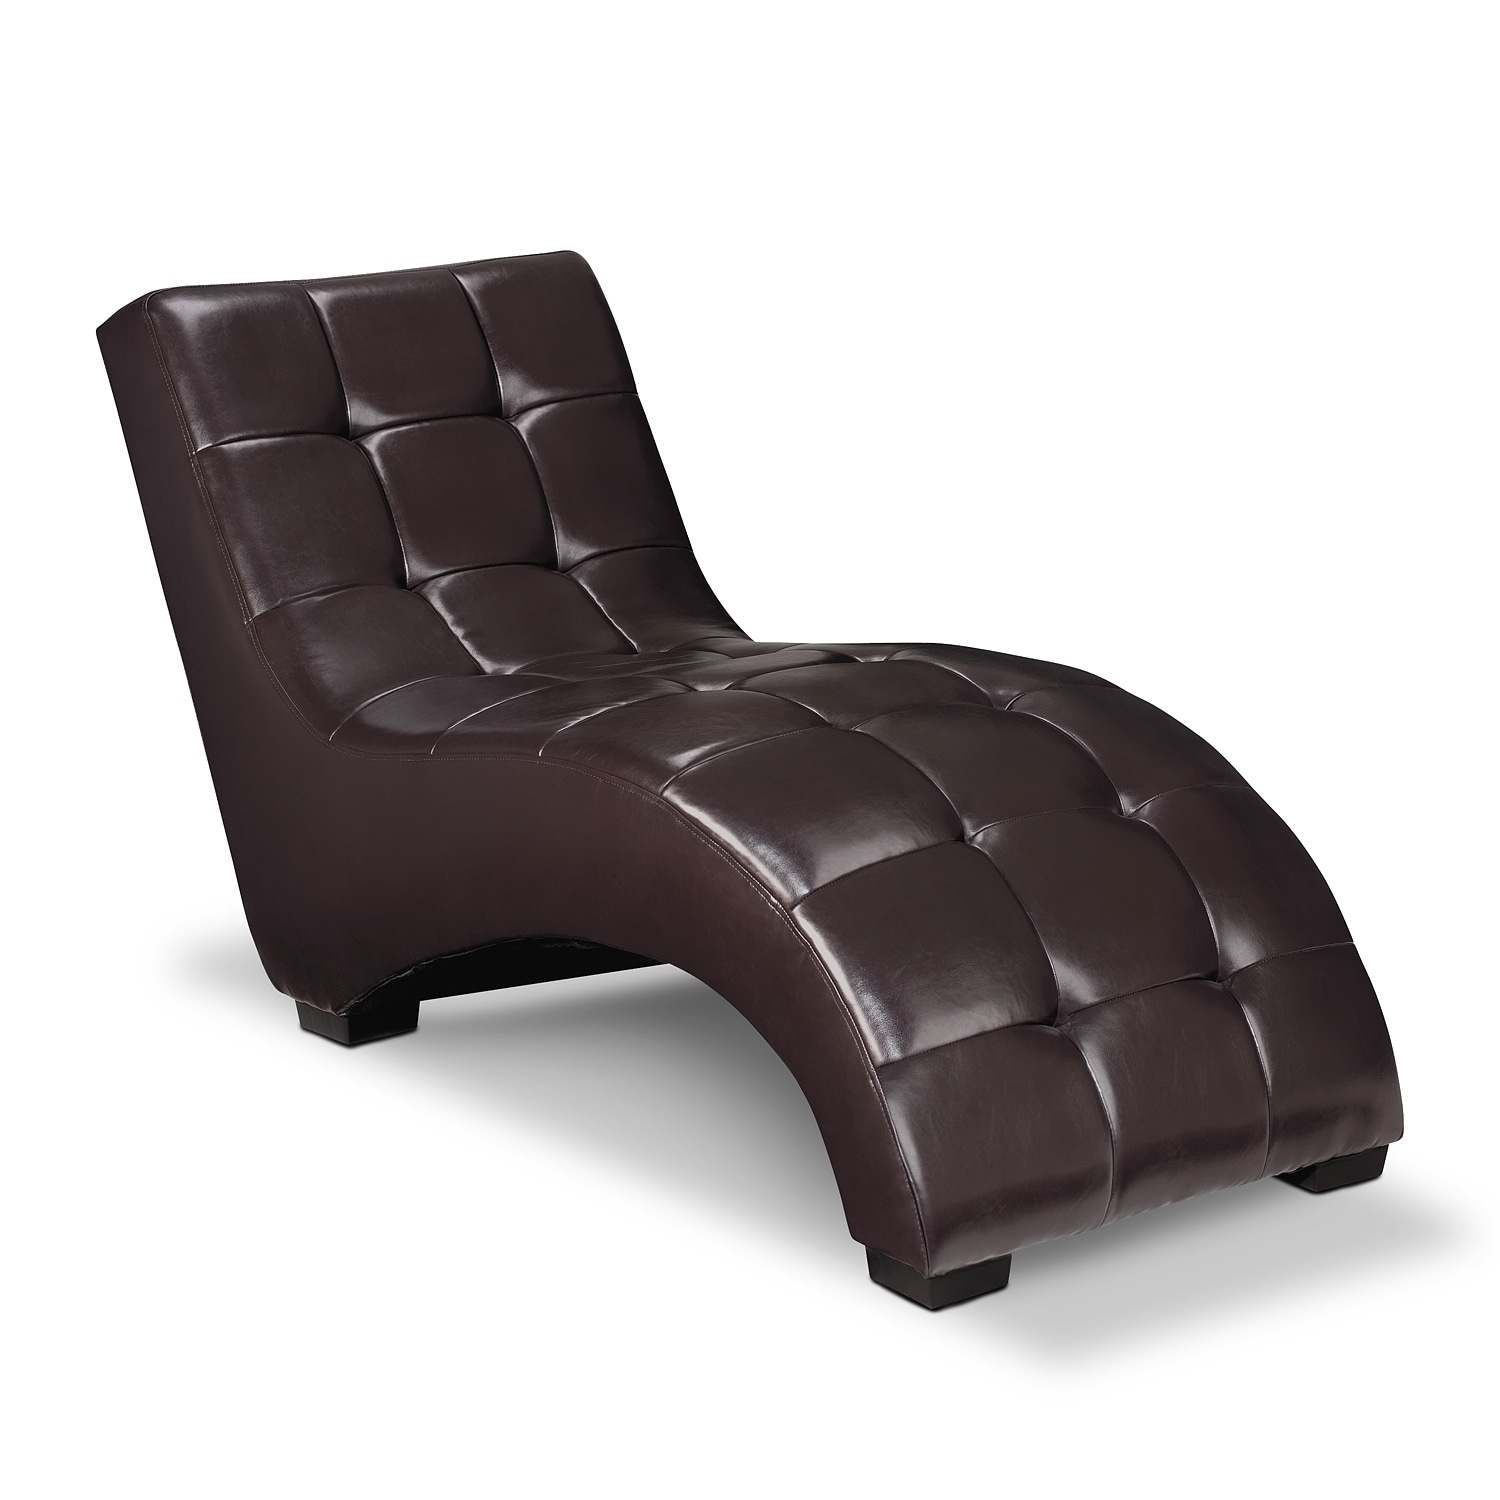 Leather Chaise Lounge Chairs - Ideas on Foter